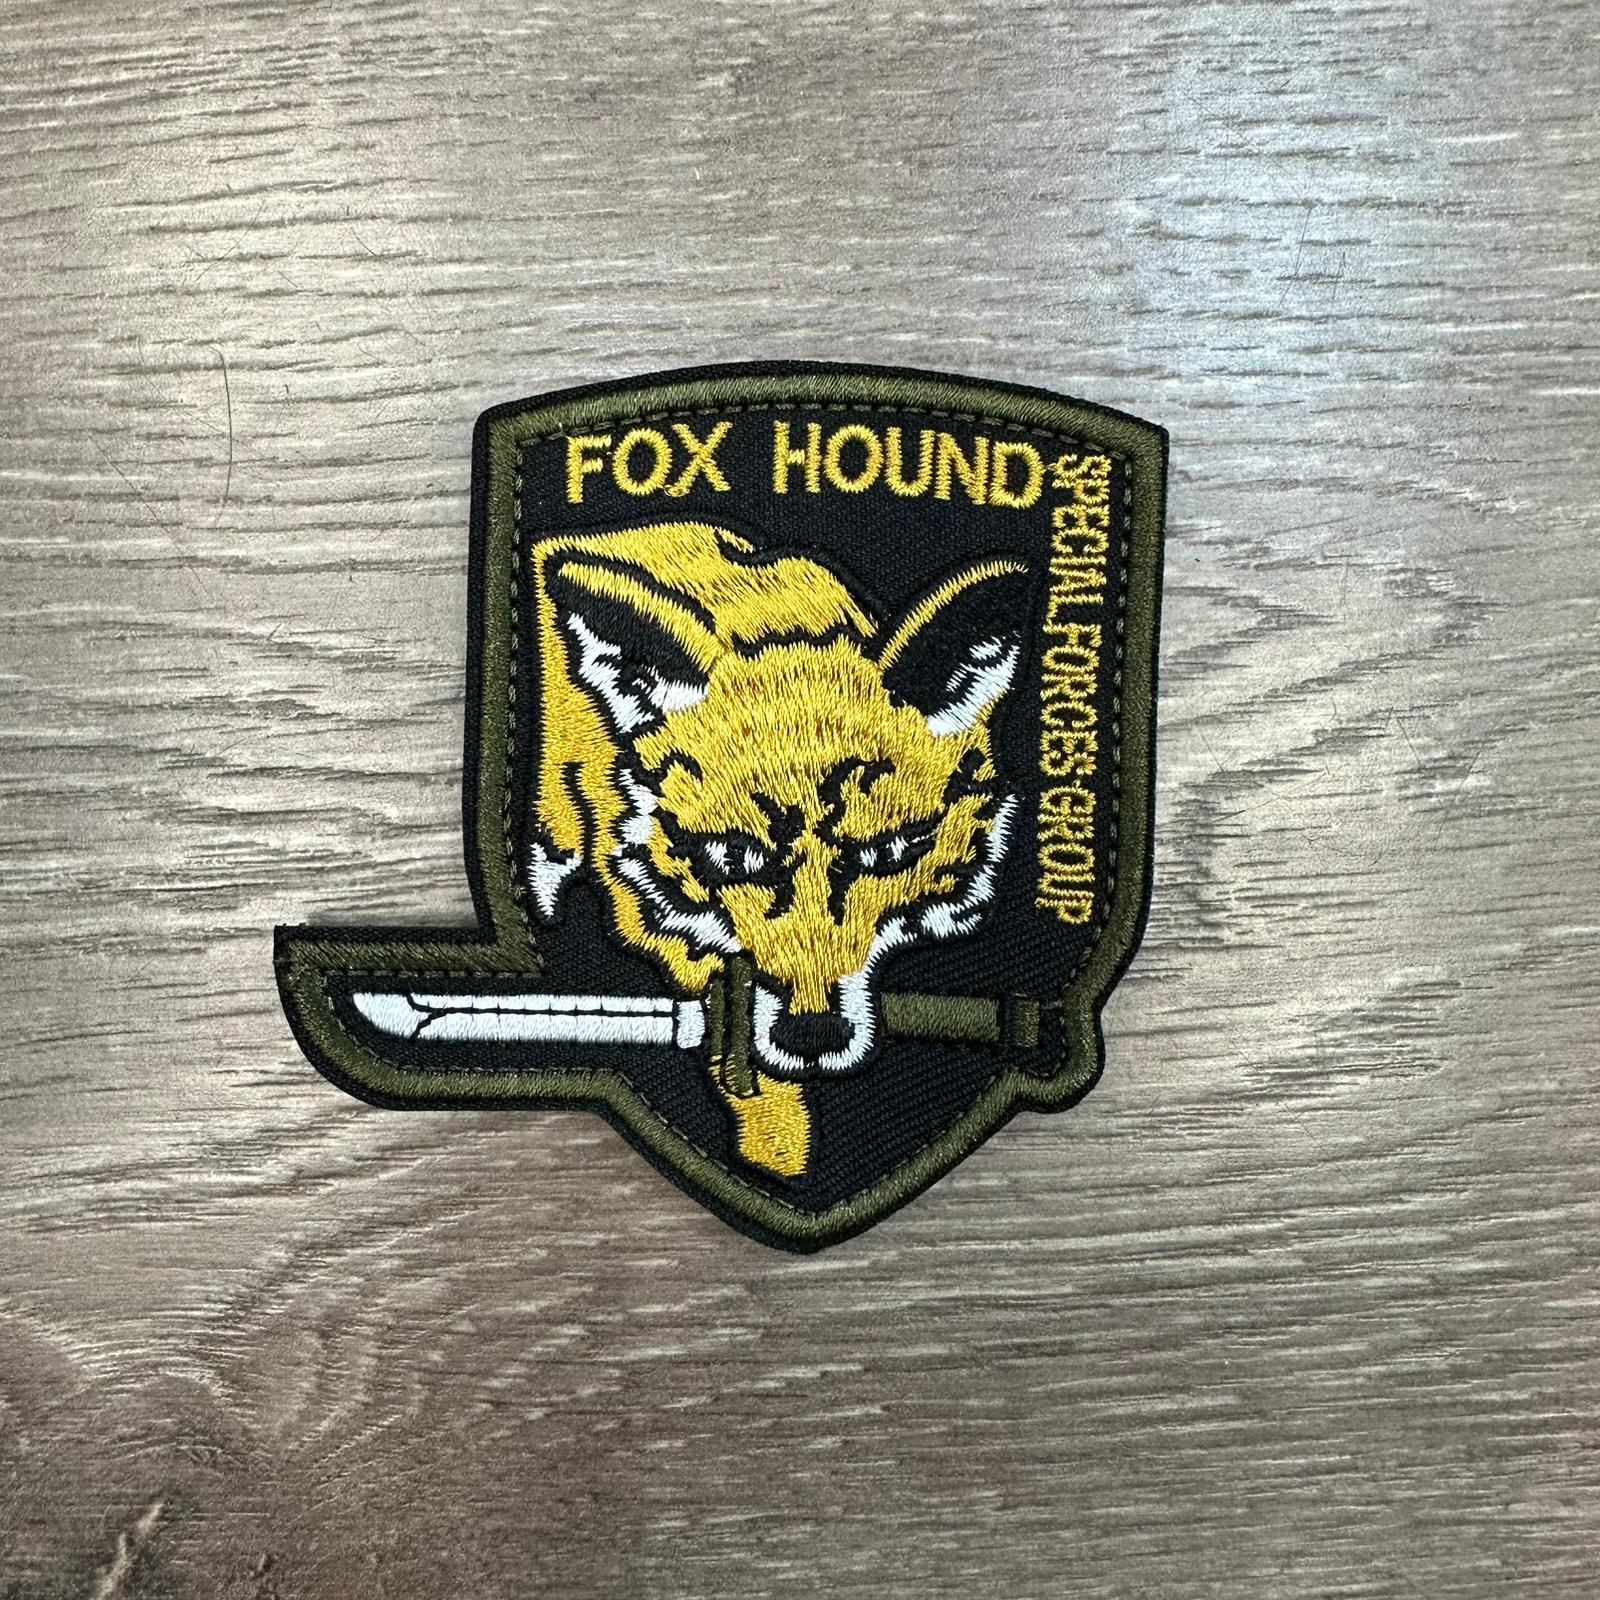 Metal Gear Solid Fox Hound Velcro Patch | Velcro Patches